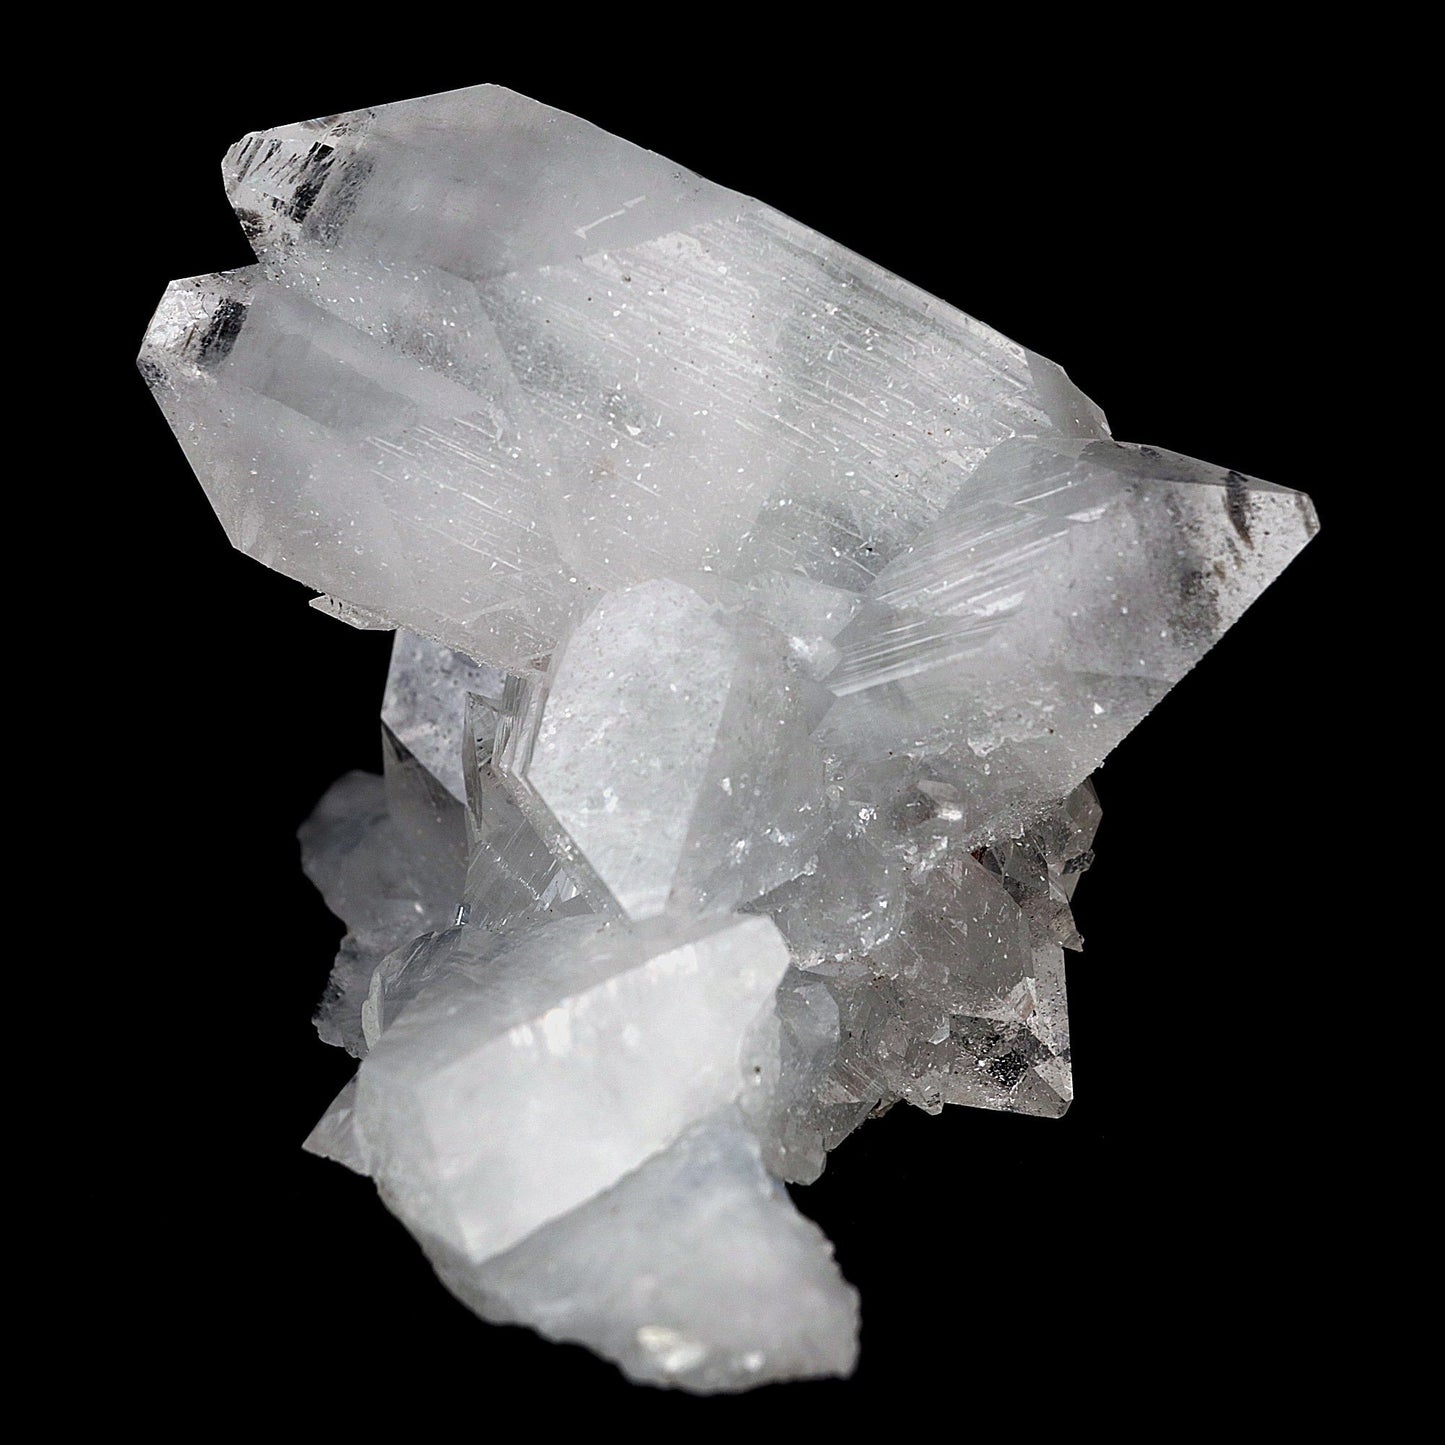 Artistic Pointed Apohyllite Cluster Natural Mineral Specimen # B 4151  https://www.superbminerals.us/products/artistic-pointed-apohyllite-cluster-natural-mineral-specimen-b-4151  Features: Beautiful gem Apophyllite crystals decorated by pointed miniature Apophyllite crystals. Apophyllite is the most desirable mineral from the Deccan Traps of India. It displays superb colorless gemmy pyramidal crystals. They have razor sharp octahedral shape. The crystals have glassy luster and pretty striations